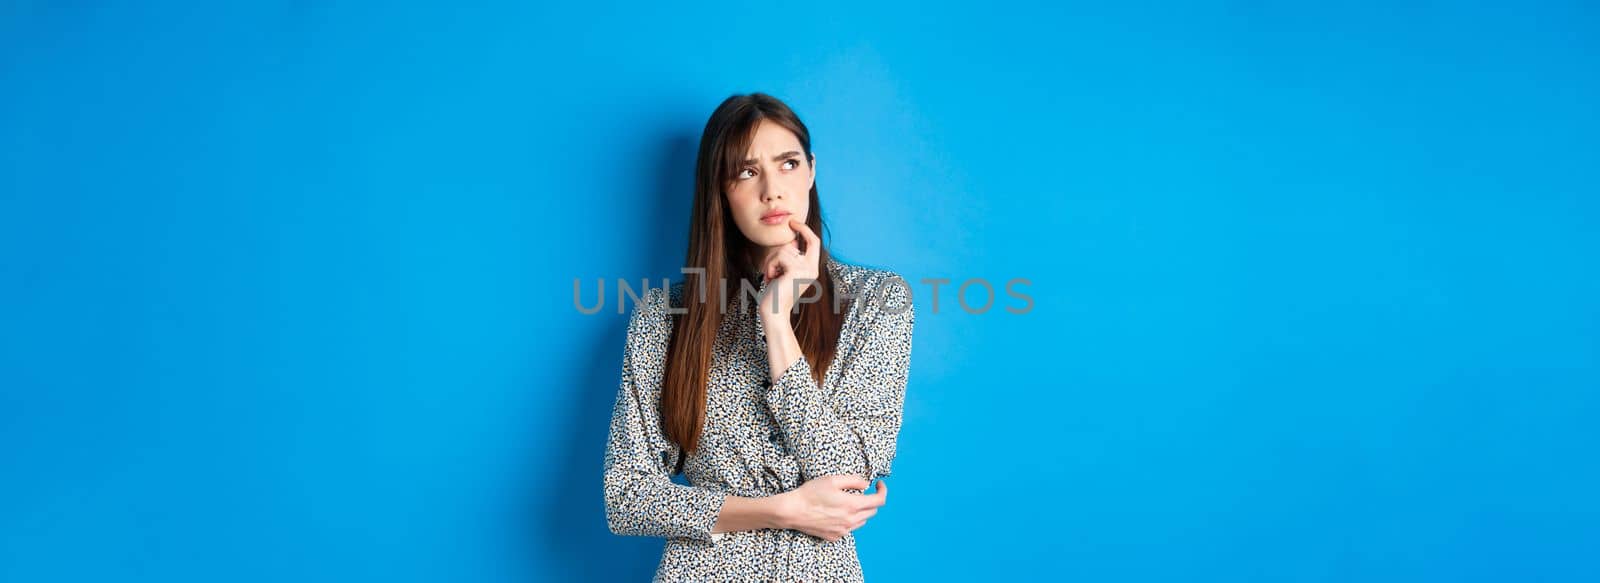 Thoughtful serious woman in dress looking away pensive, standing hesitant and unsure, thinking on blue background.